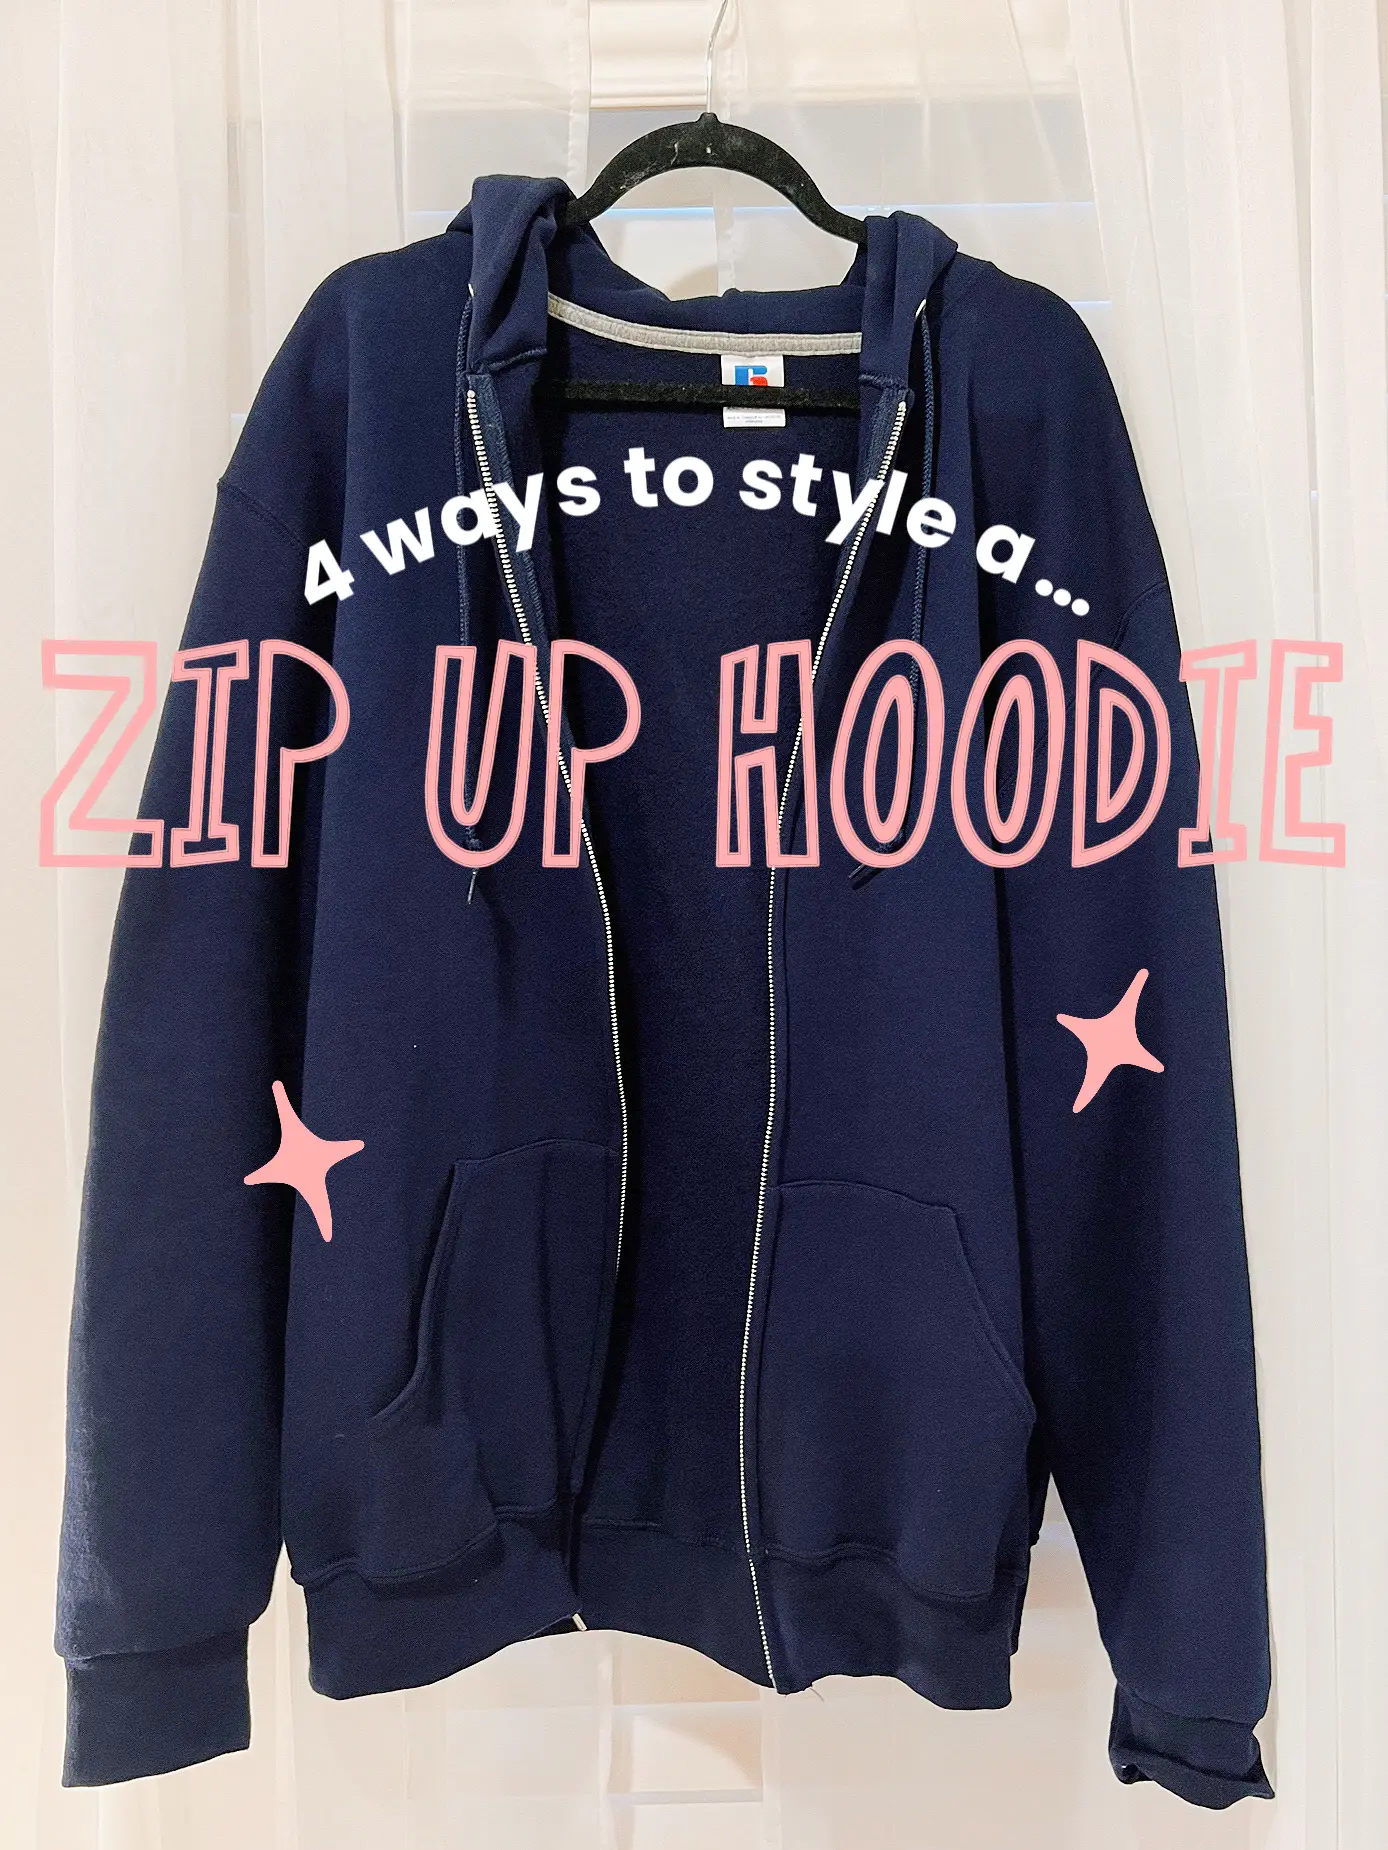 Brandy Melville oversized new york hoodie zip up Green - $56 - From remee